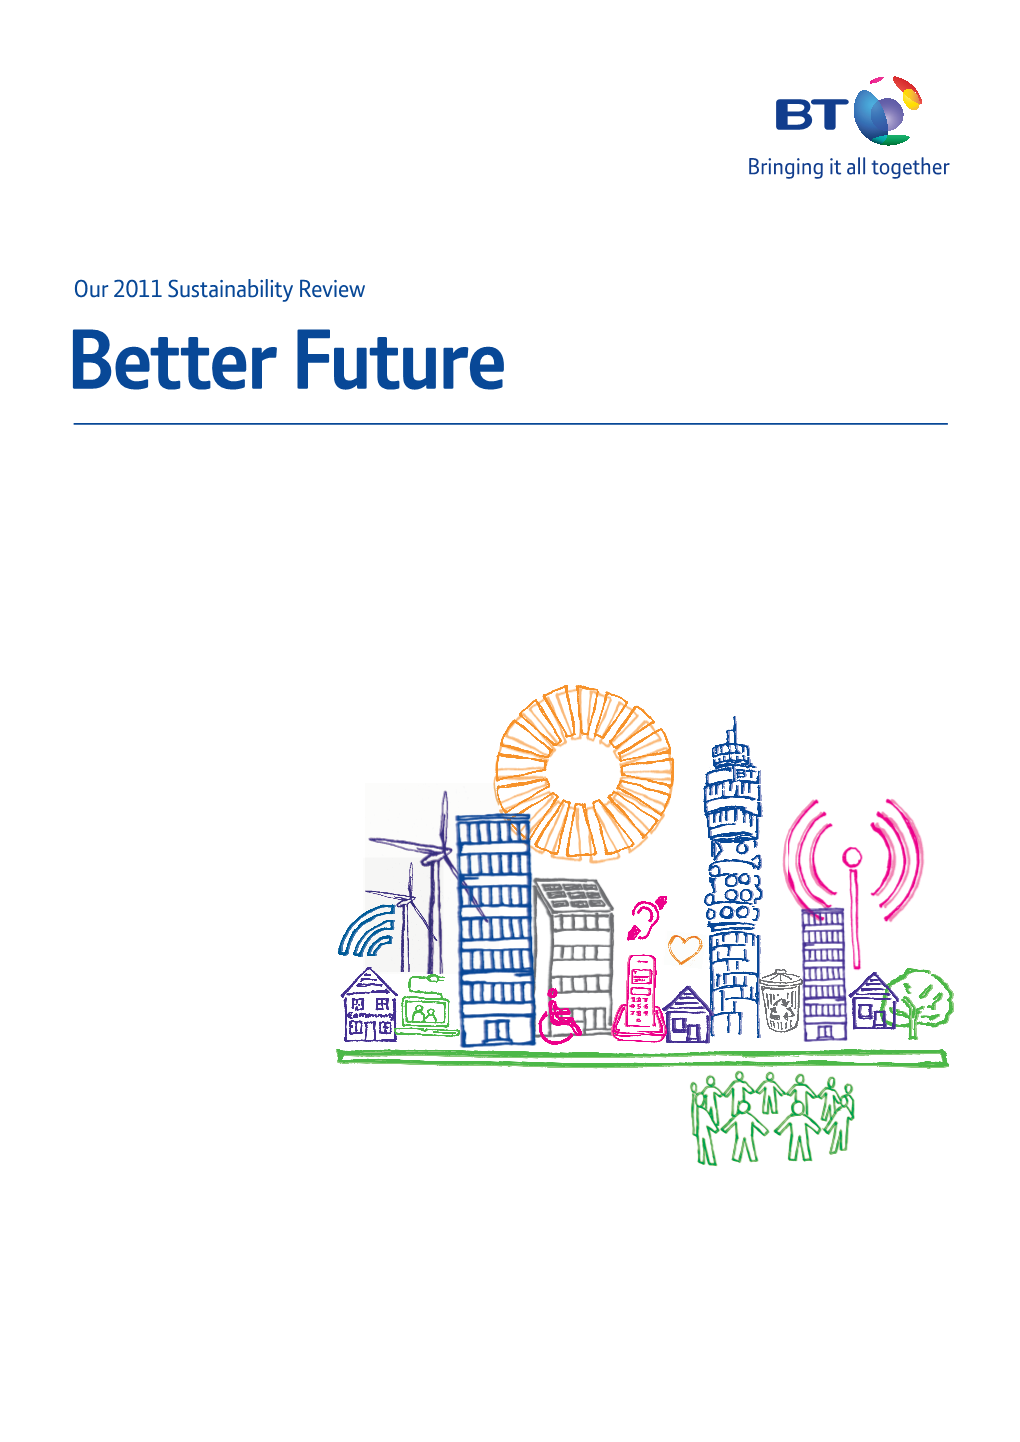 Sustainability Review 2011 1 Our Strategy for a Better Future